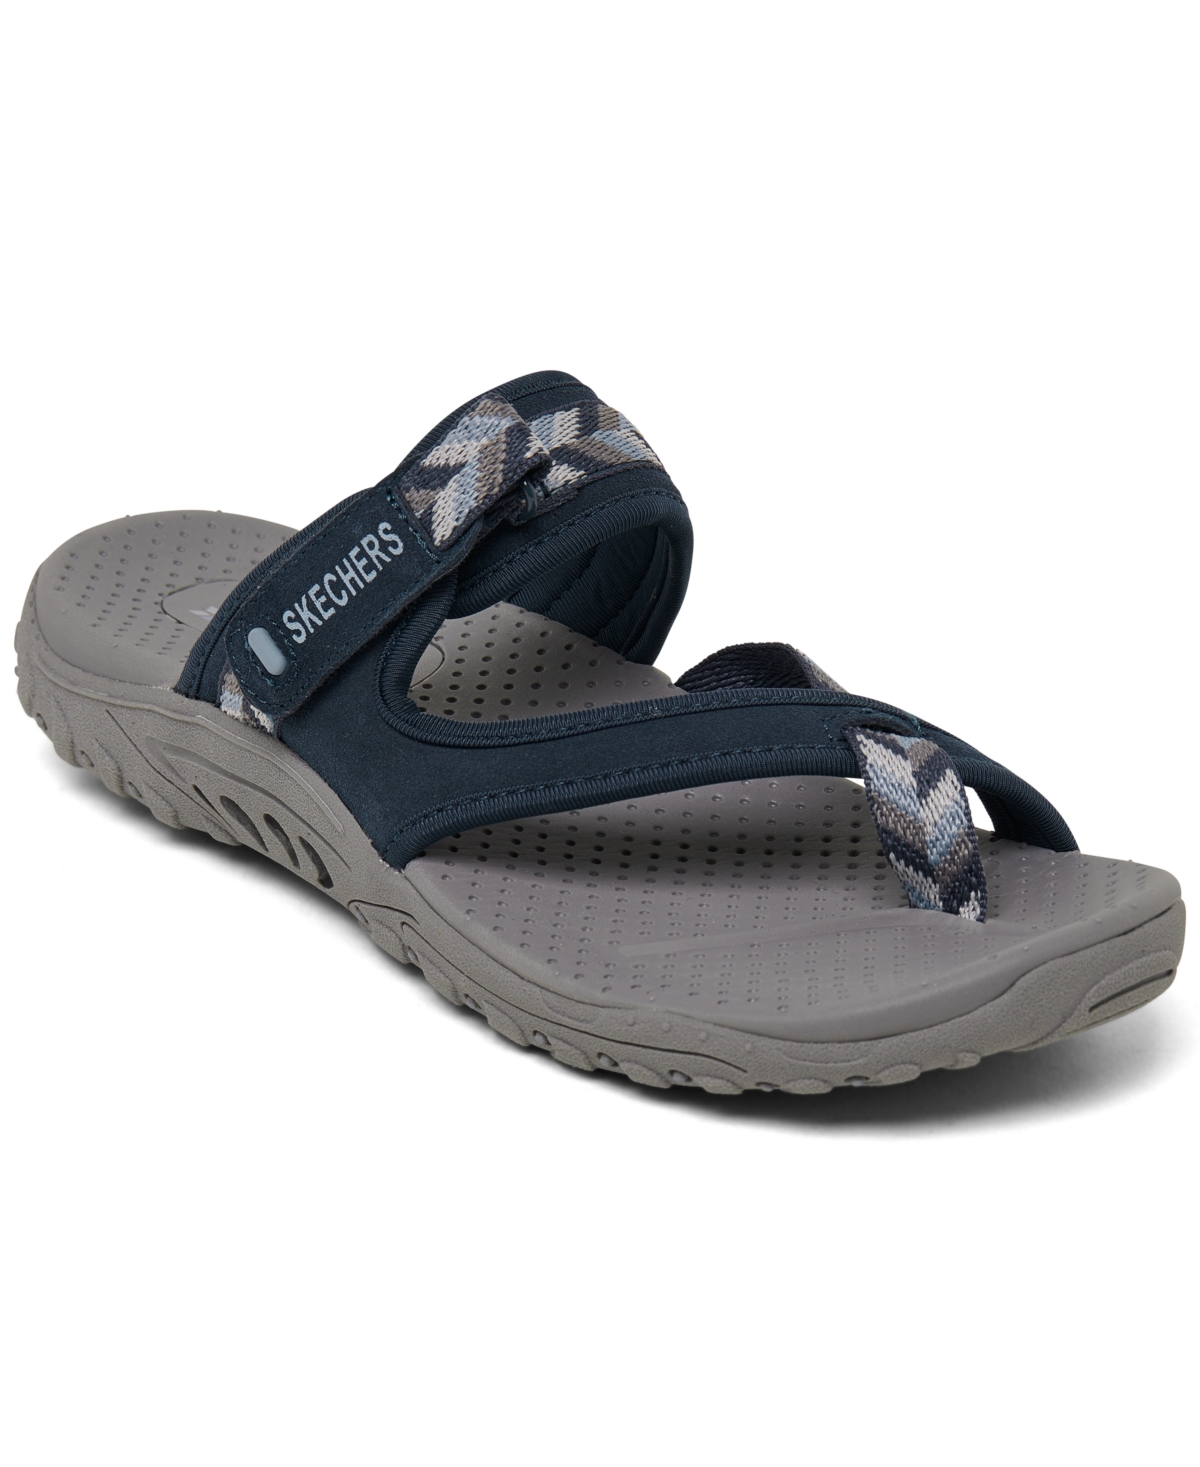 Women's Reggae - Great Escape Athletic Sandals from Finish Line - Navy